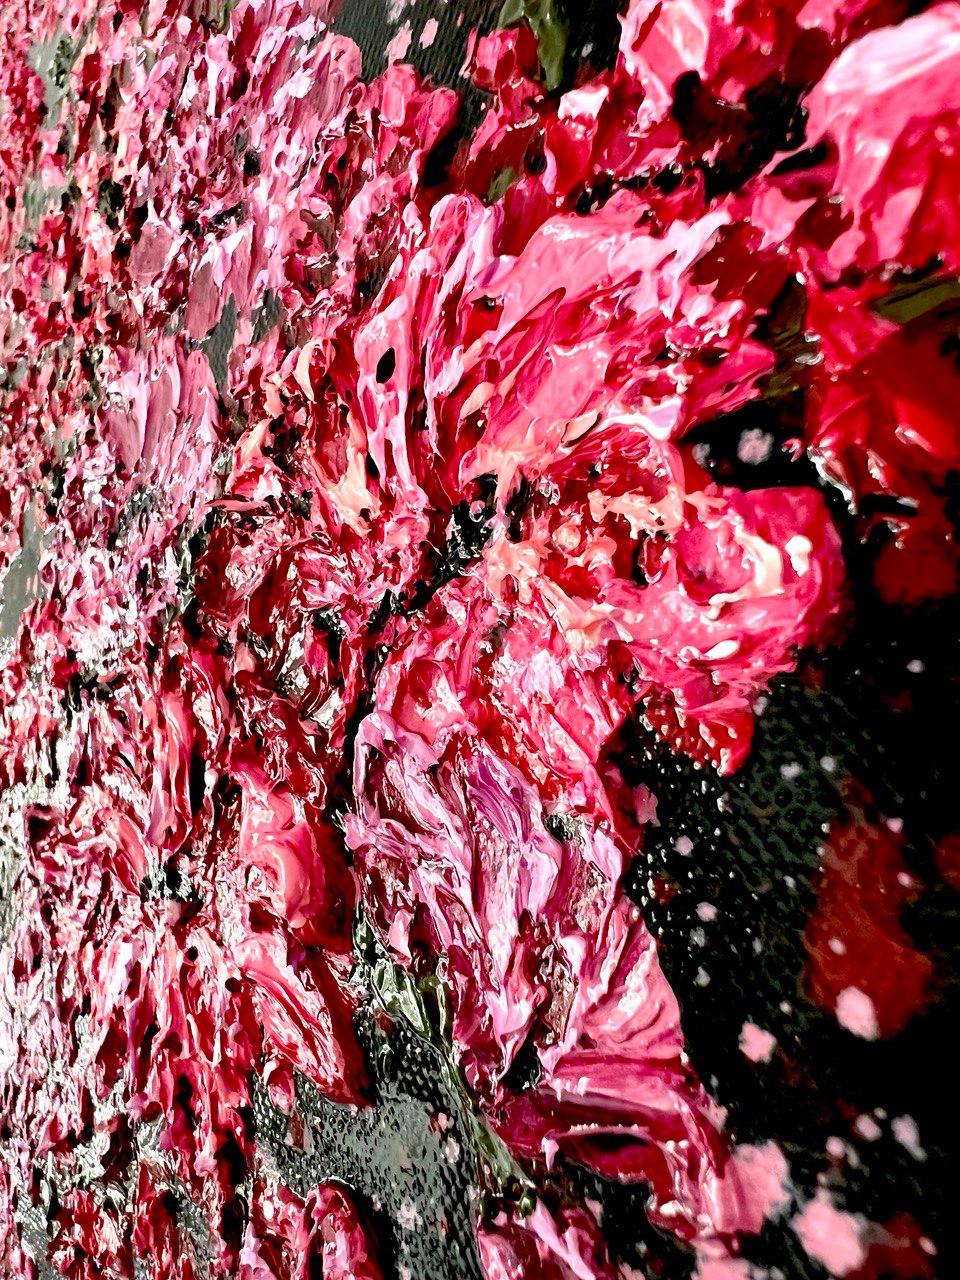  This vibrant burst of flowers contains the pure energy of nature's rebirth. Oil allowed for the layering of textures and shades, mixing expressionism with shades of abstraction. It is a dance of light and shadow, a symphony of crimson color that